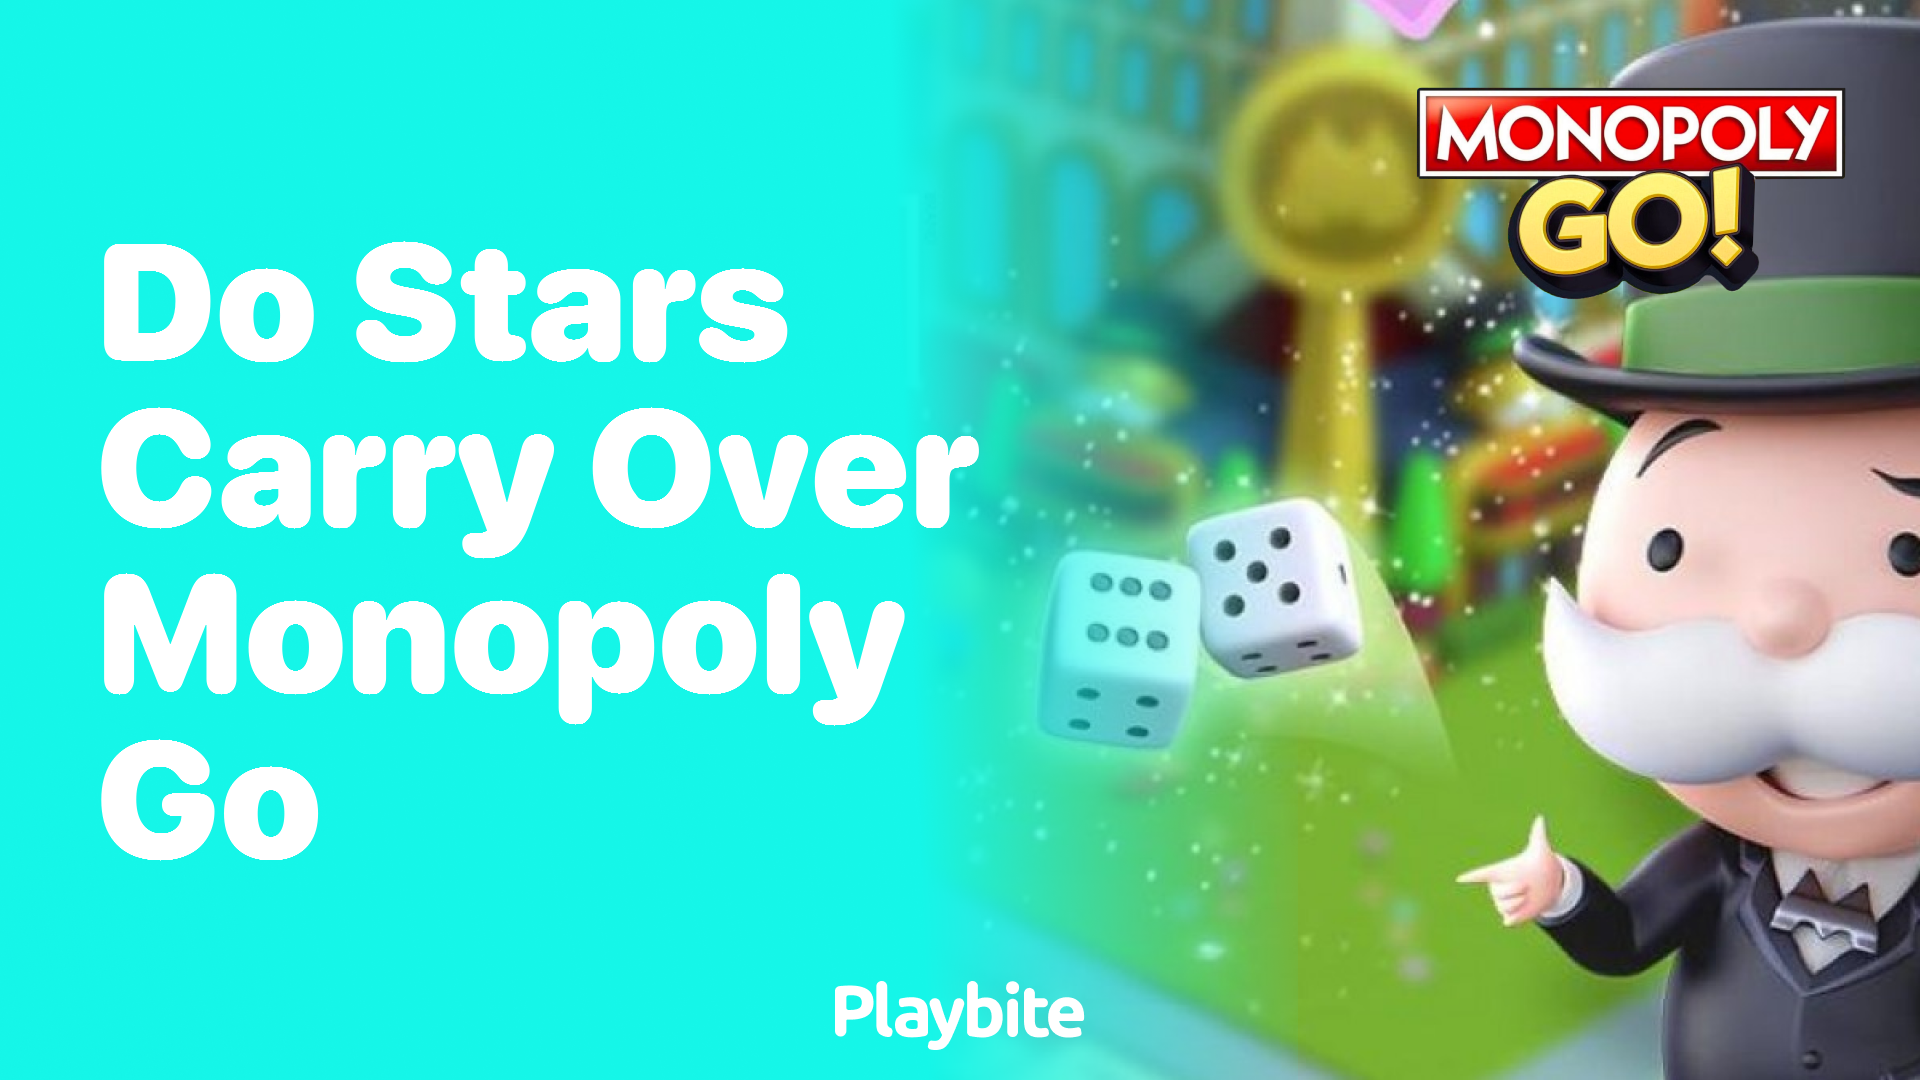 Do Stars Carry Over in Monopoly Go?